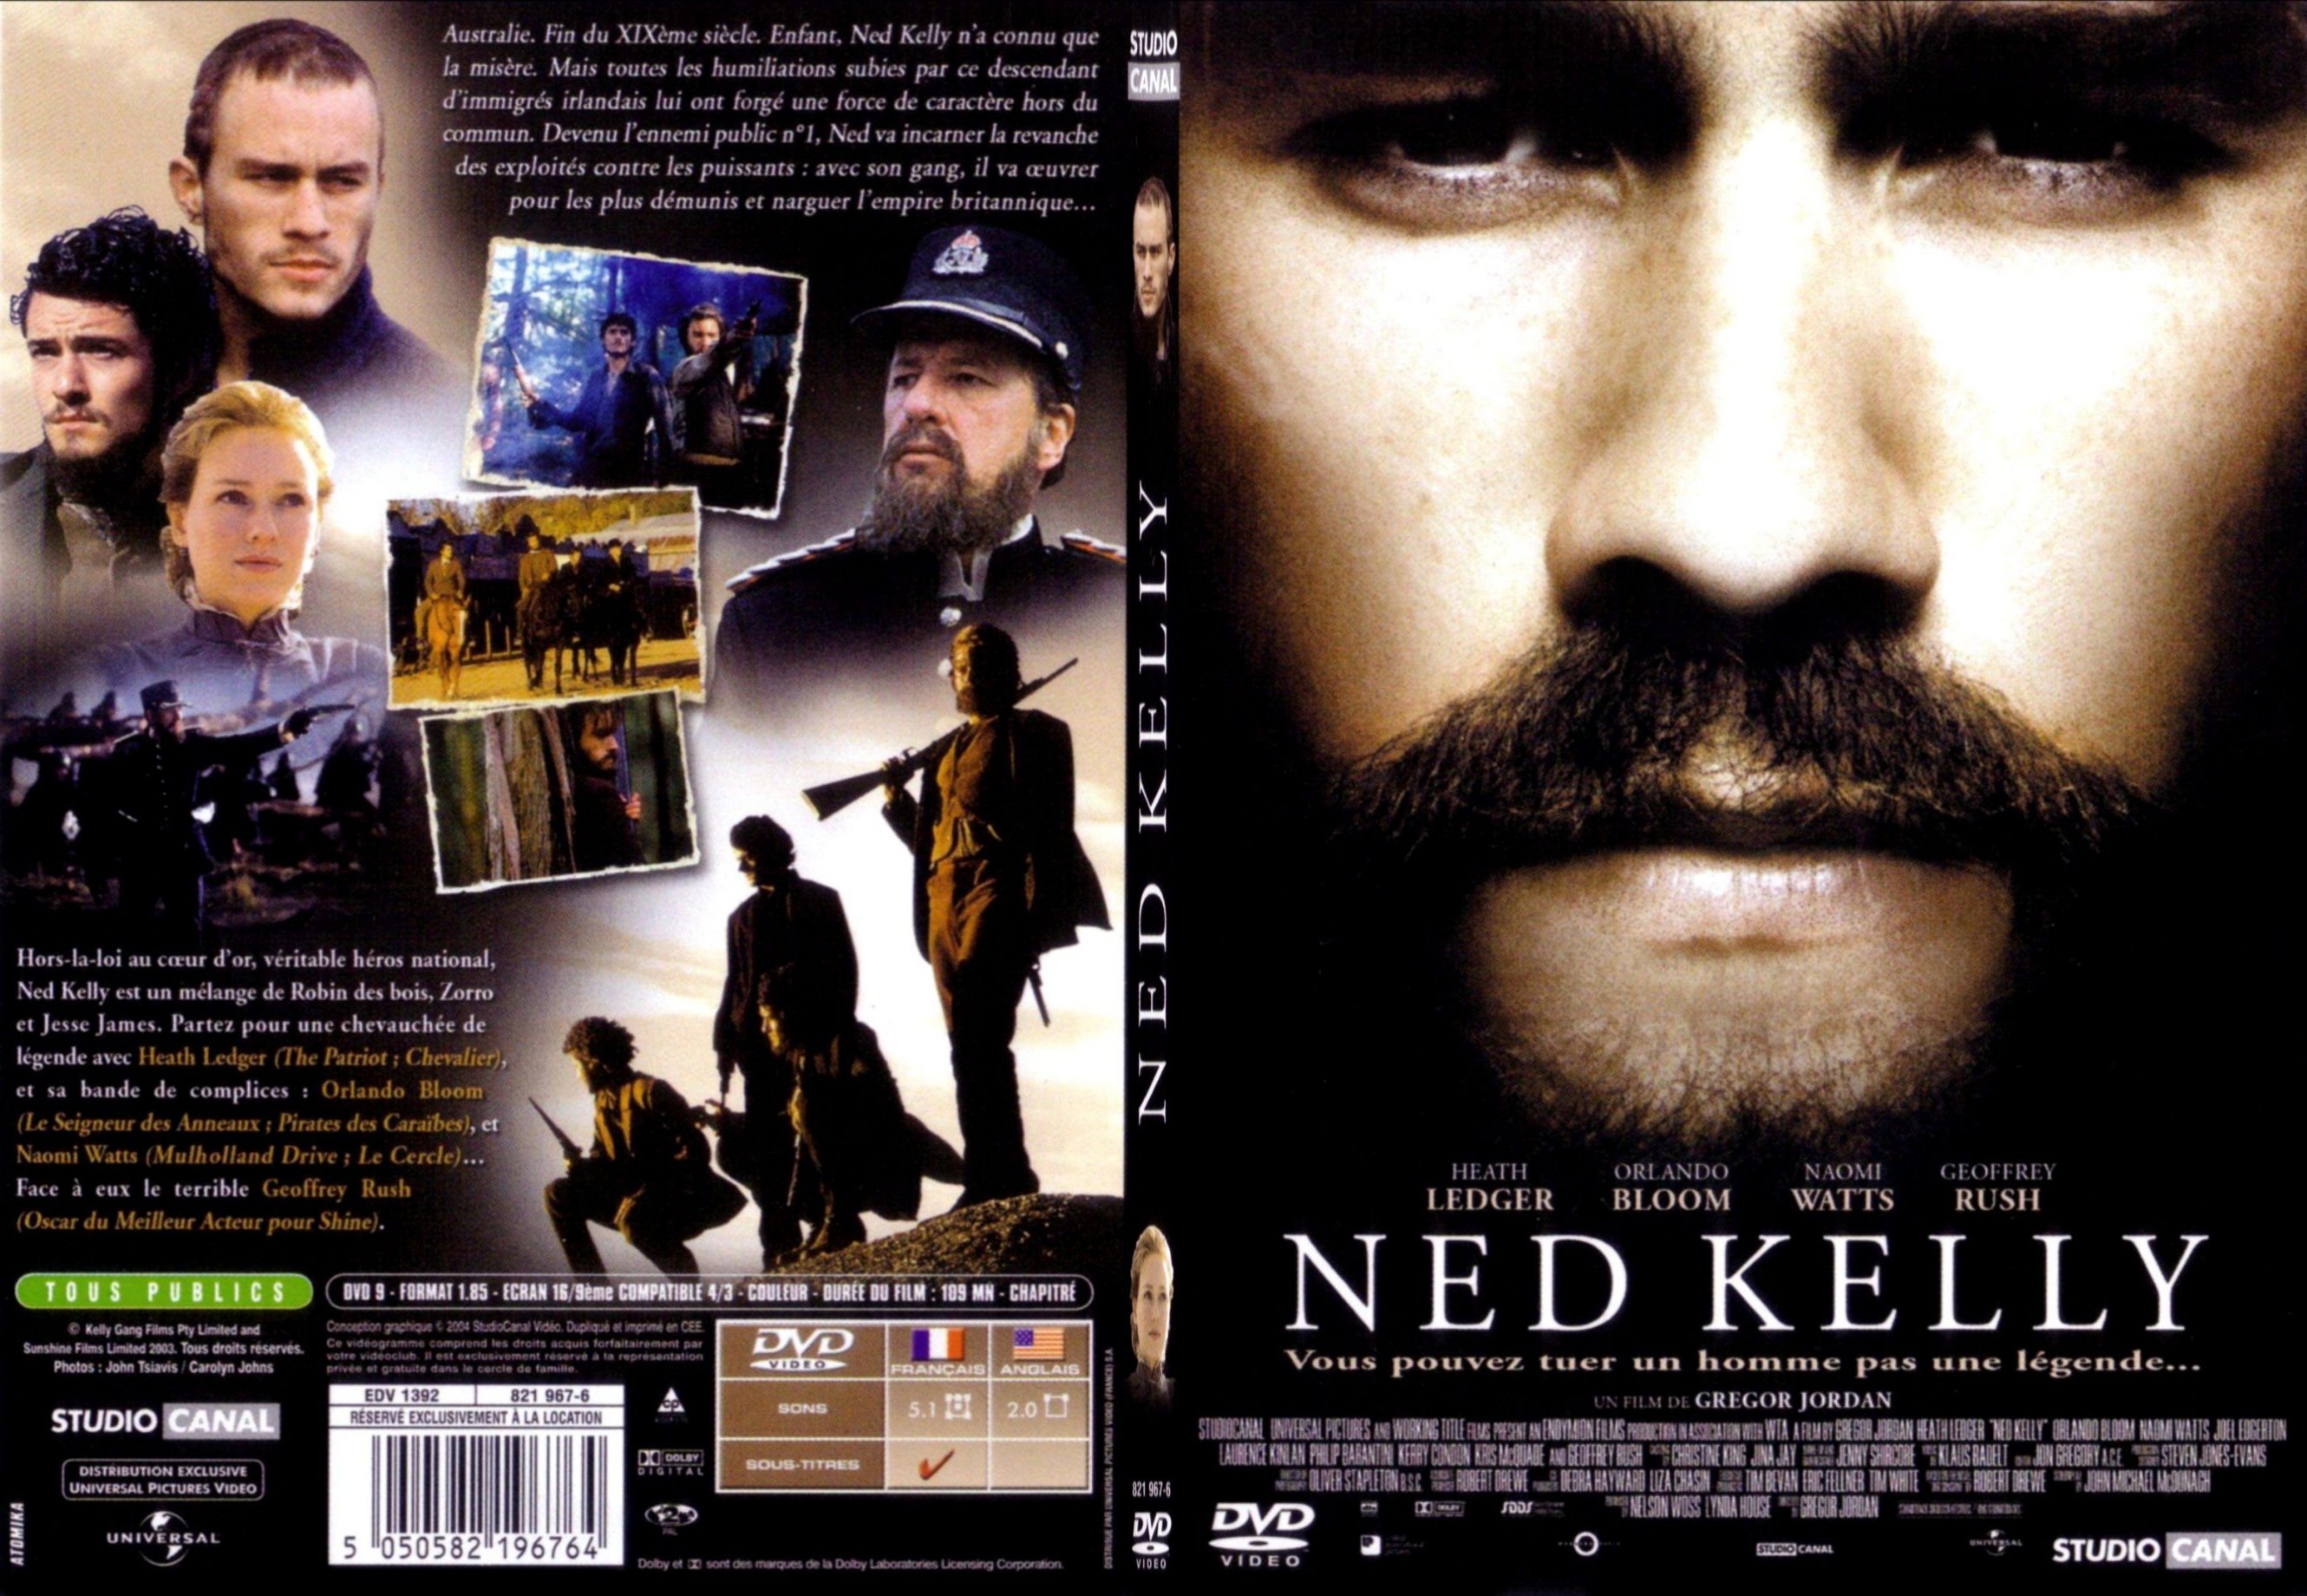 Jaquette DVD Ned Kelly - SLIM